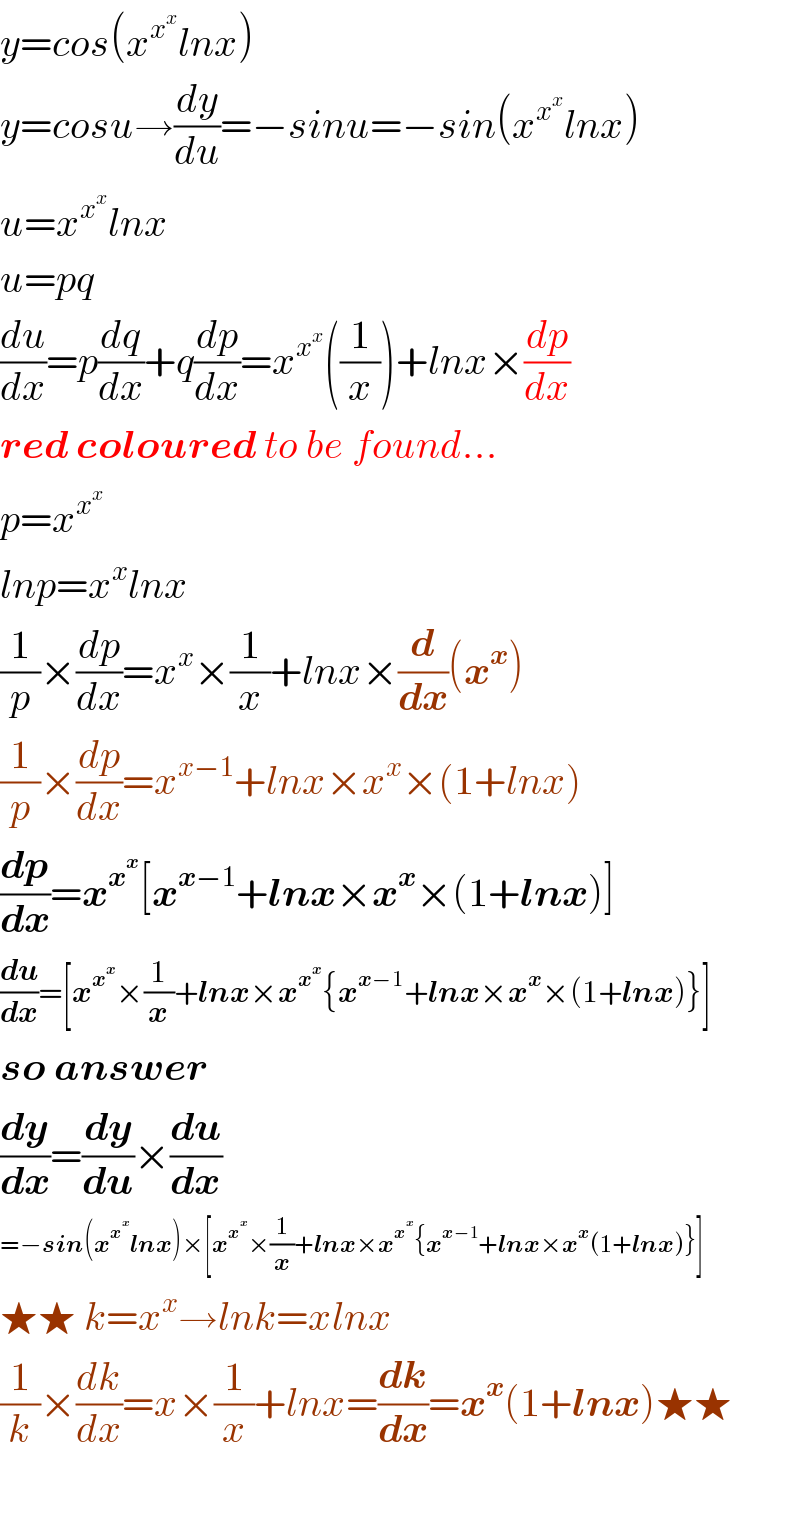 y=cos(x^x^x  lnx)  y=cosu→(dy/du)=−sinu=−sin(x^x^x  lnx)  u=x^x^x  lnx  u=pq  (du/dx)=p(dq/dx)+q(dp/dx)=x^x^x  ((1/x))+lnx×(dp/dx)  red coloured to be found...  p=x^x^x    lnp=x^x lnx  (1/p)×(dp/dx)=x^x ×(1/x)+lnx×(d/dx)(x^x )  (1/p)×(dp/dx)=x^(x−1) +lnx×x^x ×(1+lnx)  (dp/dx)=x^x^x  [x^(x−1) +lnx×x^x ×(1+lnx)]  (du/dx)=[x^x^x  ×(1/x)+lnx×x^x^x  {x^(x−1) +lnx×x^x ×(1+lnx)}]  so answer  (dy/dx)=(dy/du)×(du/dx)  =−sin(x^x^x  lnx)×[x^x^x  ×(1/x)+lnx×x^x^x  {x^(x−1) +lnx×x^x (1+lnx)}]  ★★ k=x^x →lnk=xlnx   (1/k)×(dk/dx)=x×(1/x)+lnx=(dk/dx)=x^x (1+lnx)★★    